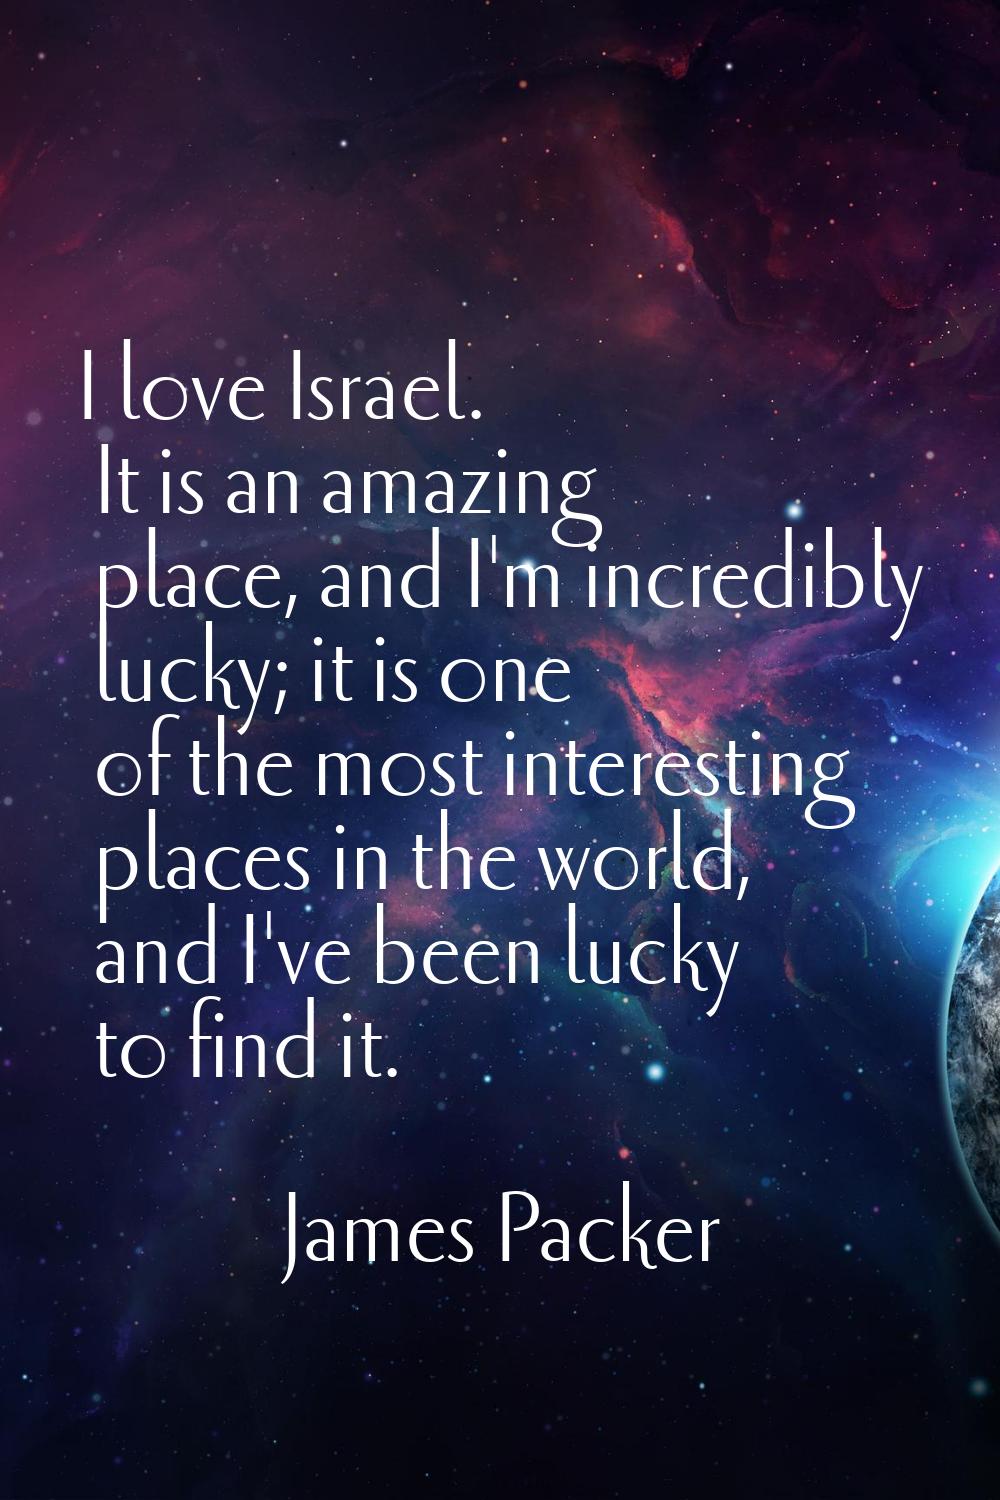 I love Israel. It is an amazing place, and I'm incredibly lucky; it is one of the most interesting 